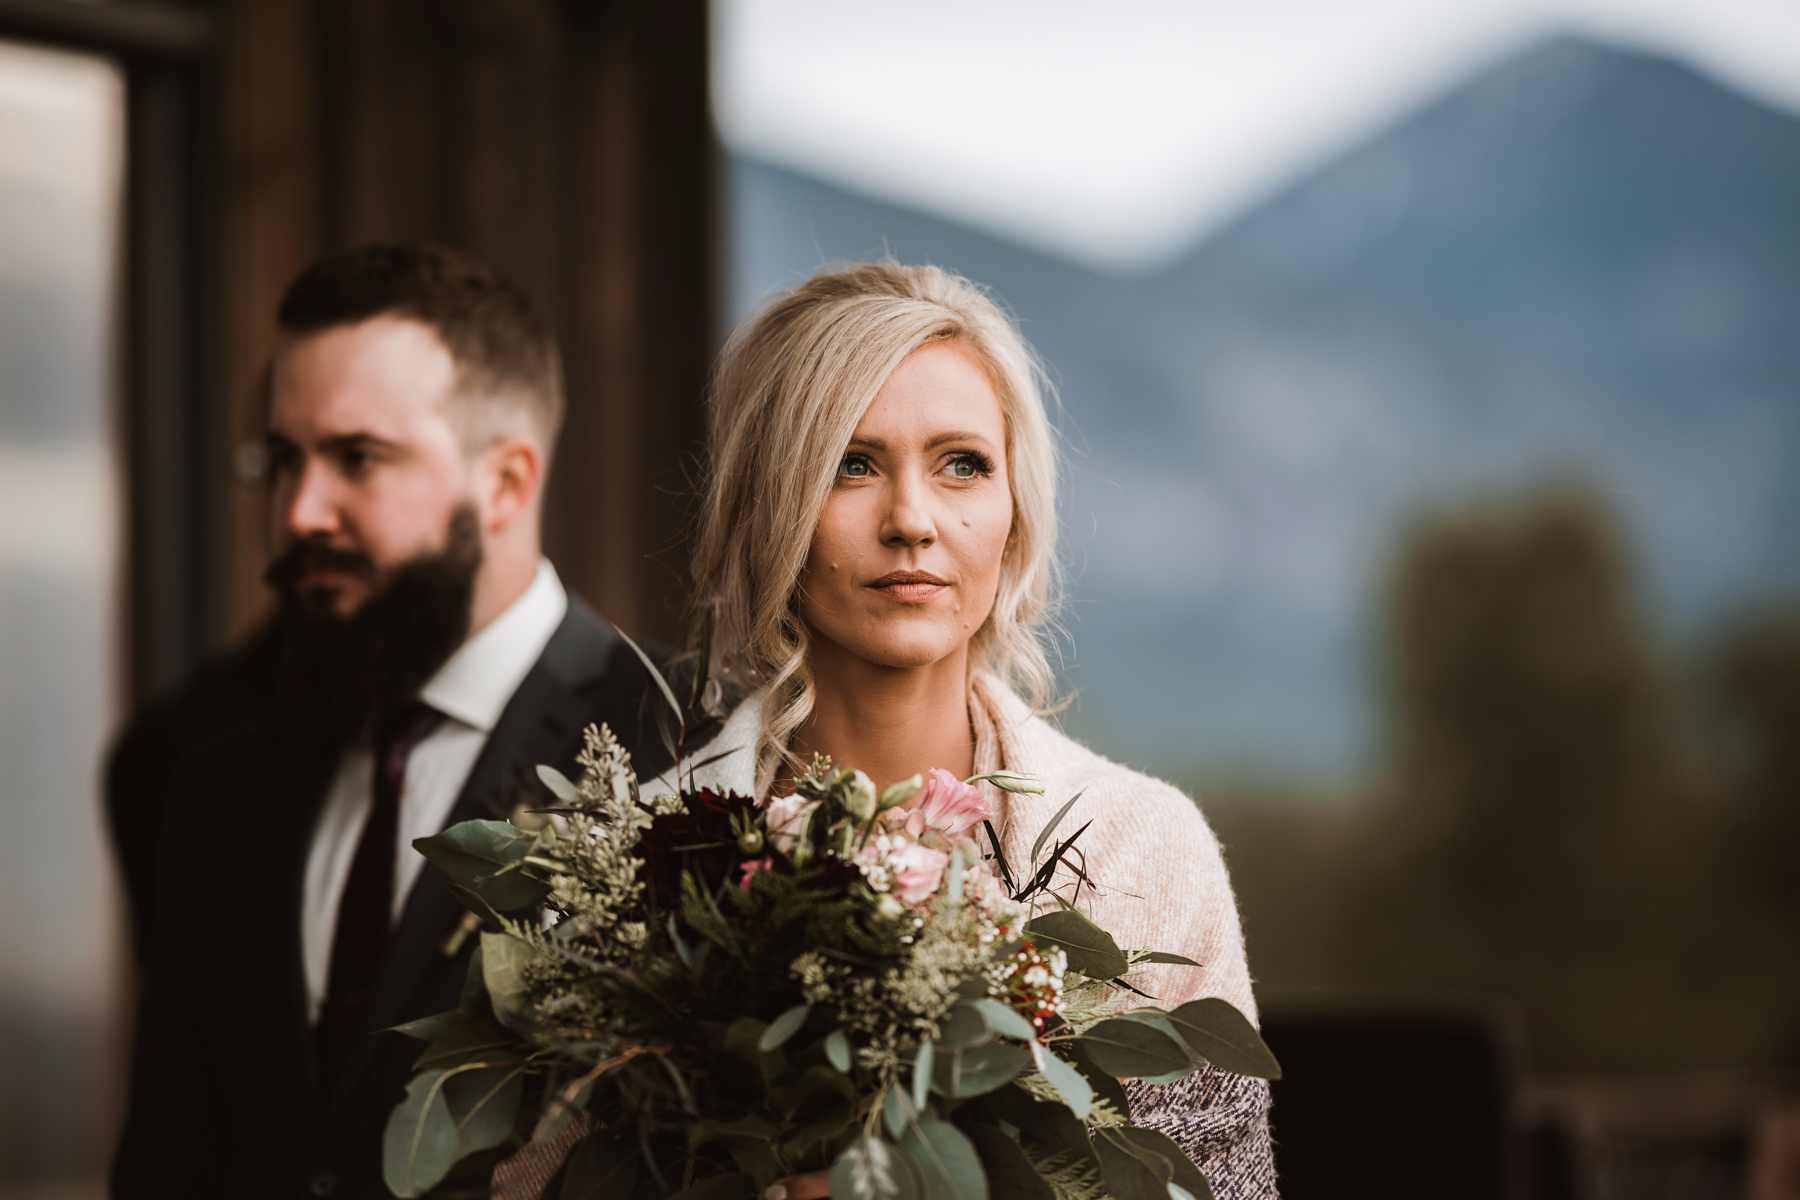 Calgary wedding photographer in Invermere for adventurous mountain destination elopement at Eagle Ranch Golf Resort, British Columbia - Image 18